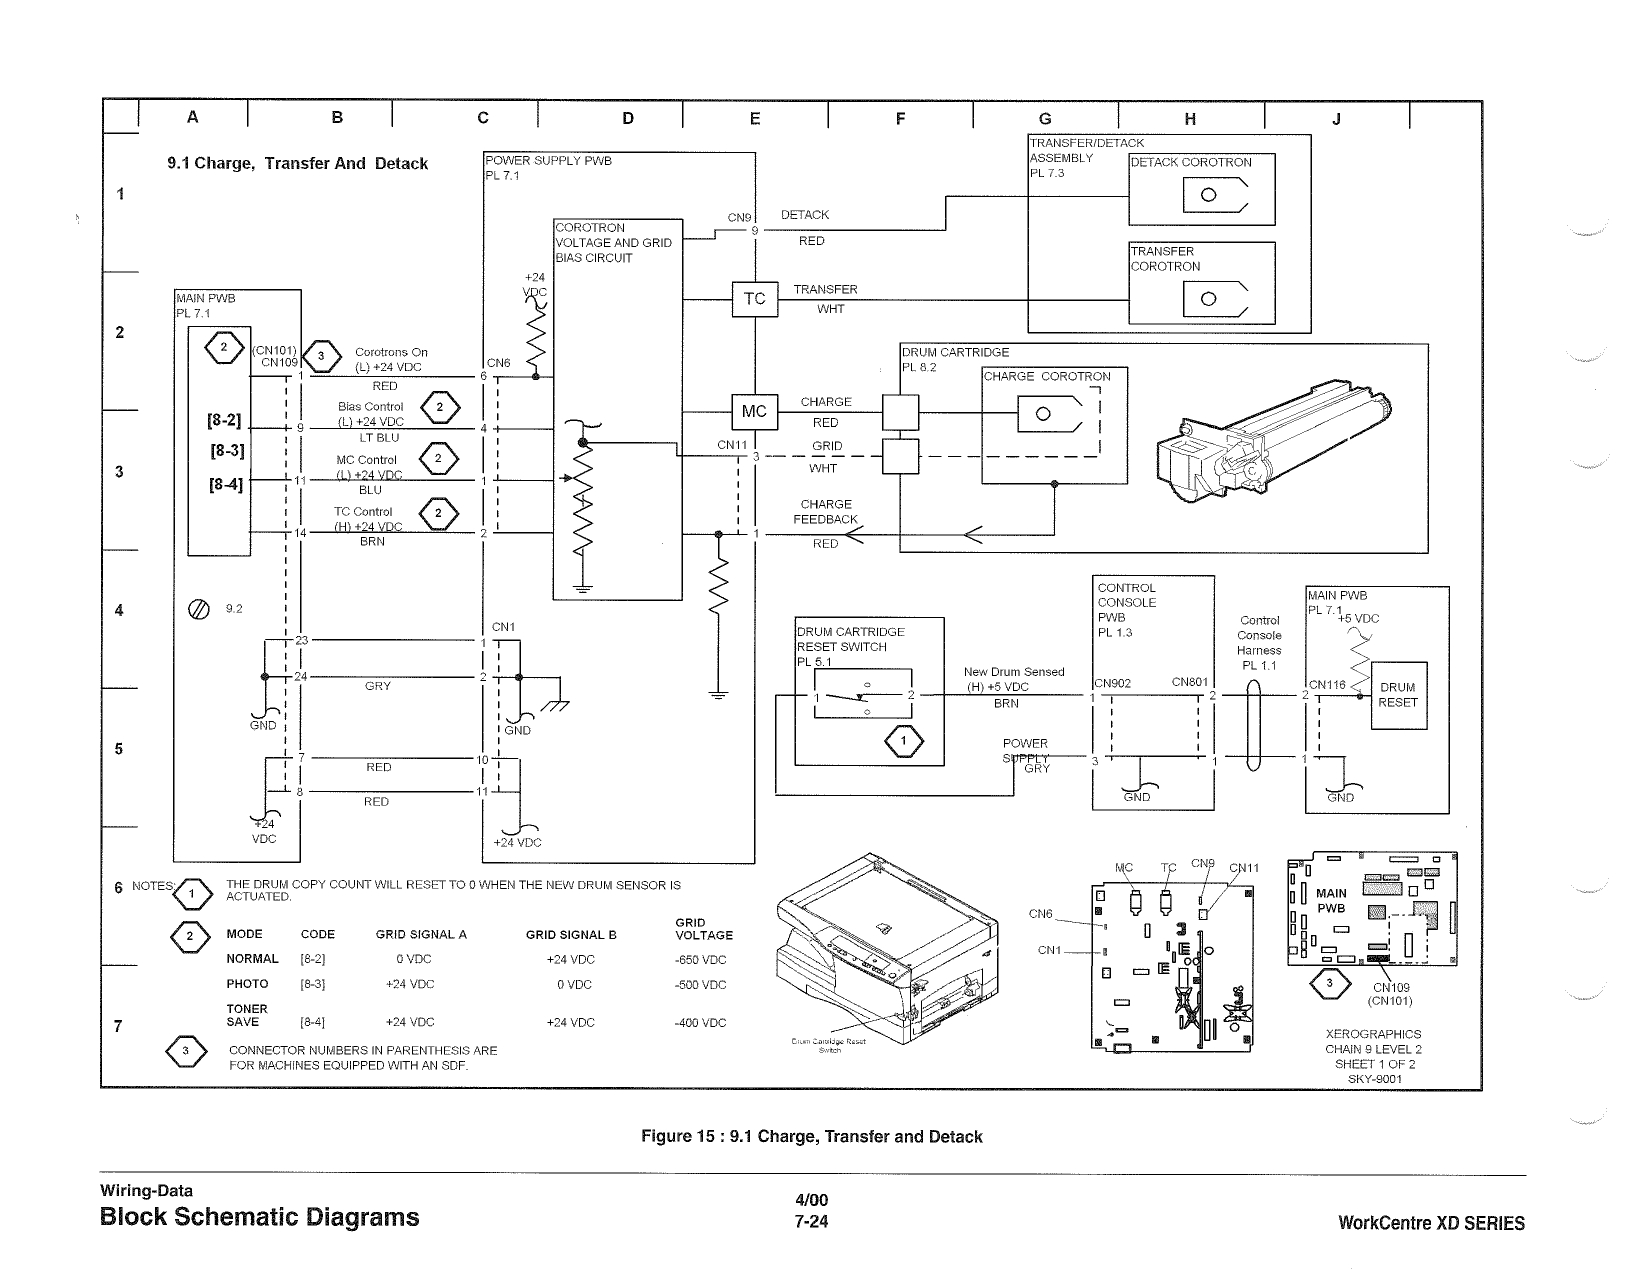 Xerox WorkCentre XD Series Parts List and Service Manual-6